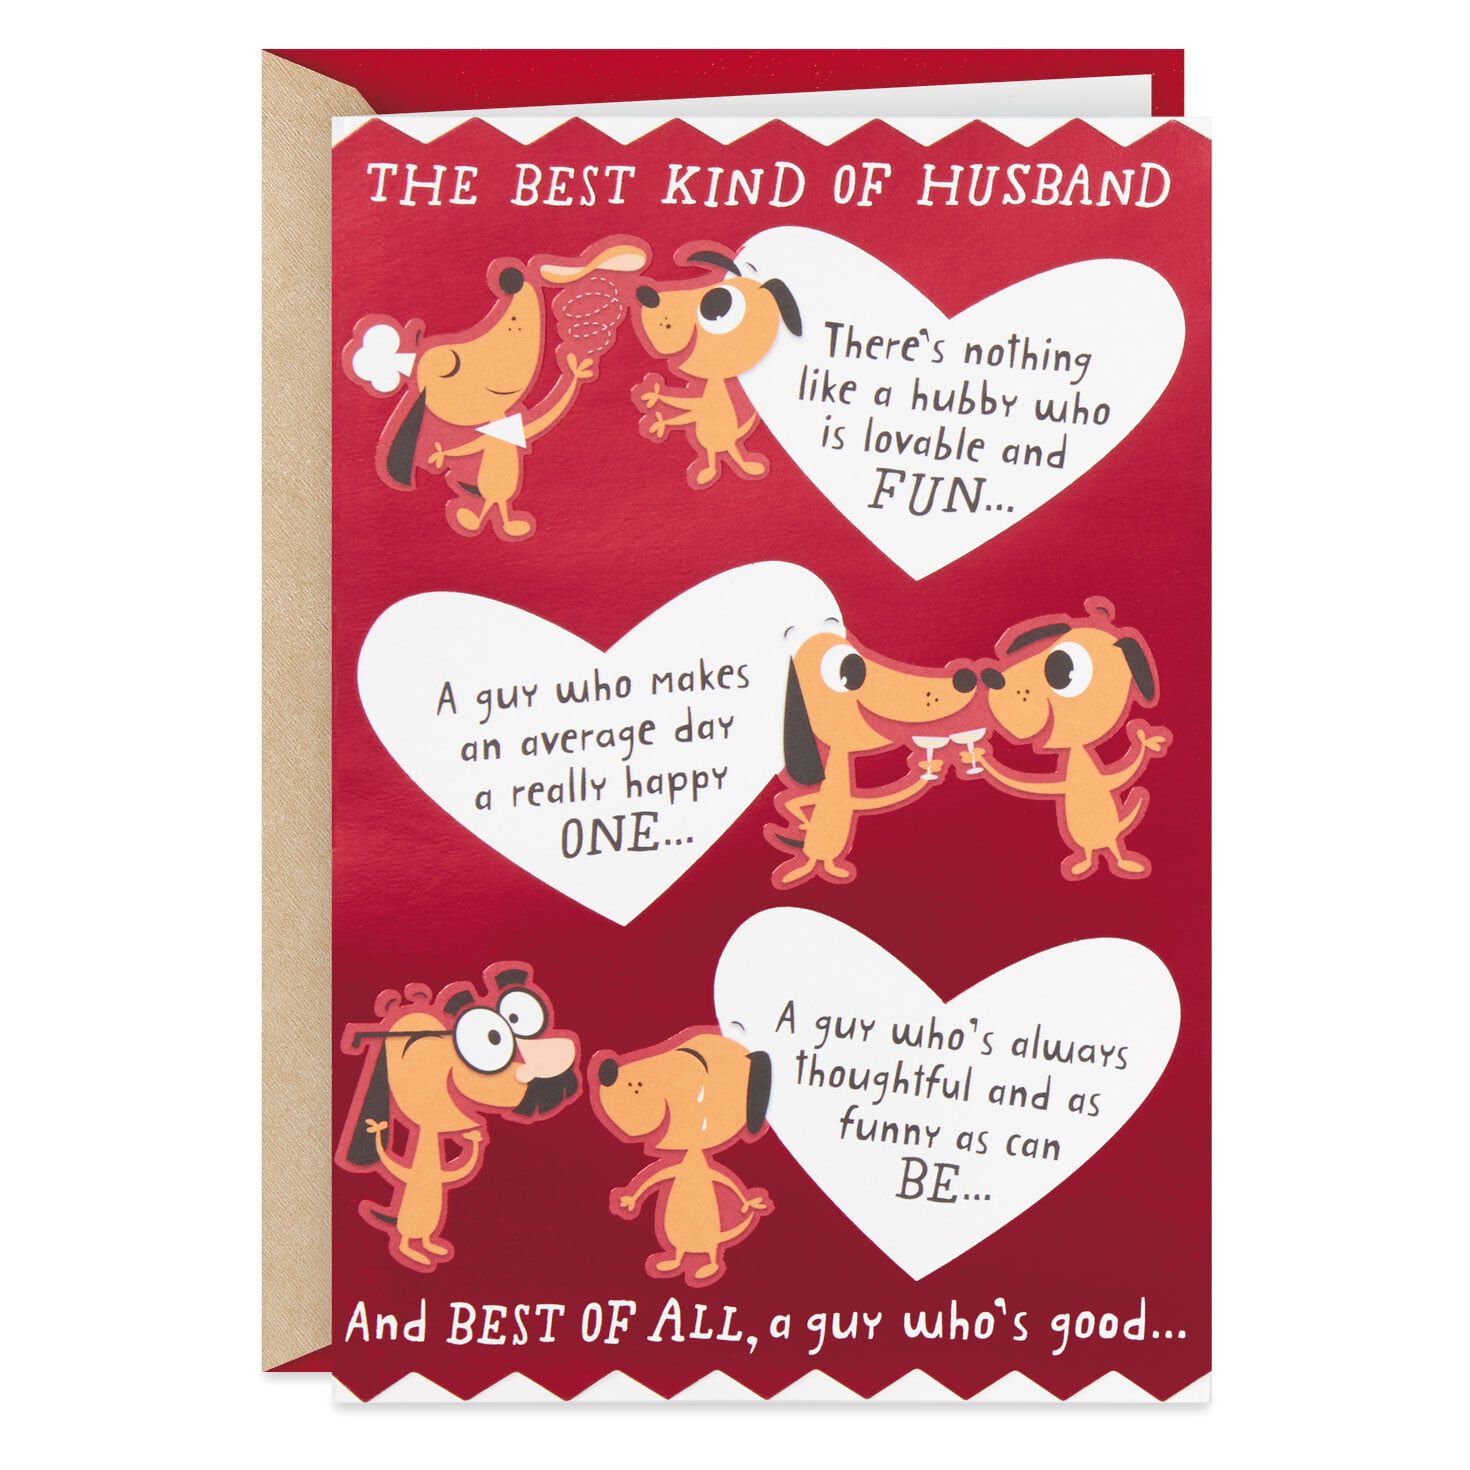 Cute Die-Cut Moving Design Valentine Card for Husband from Hallmark 